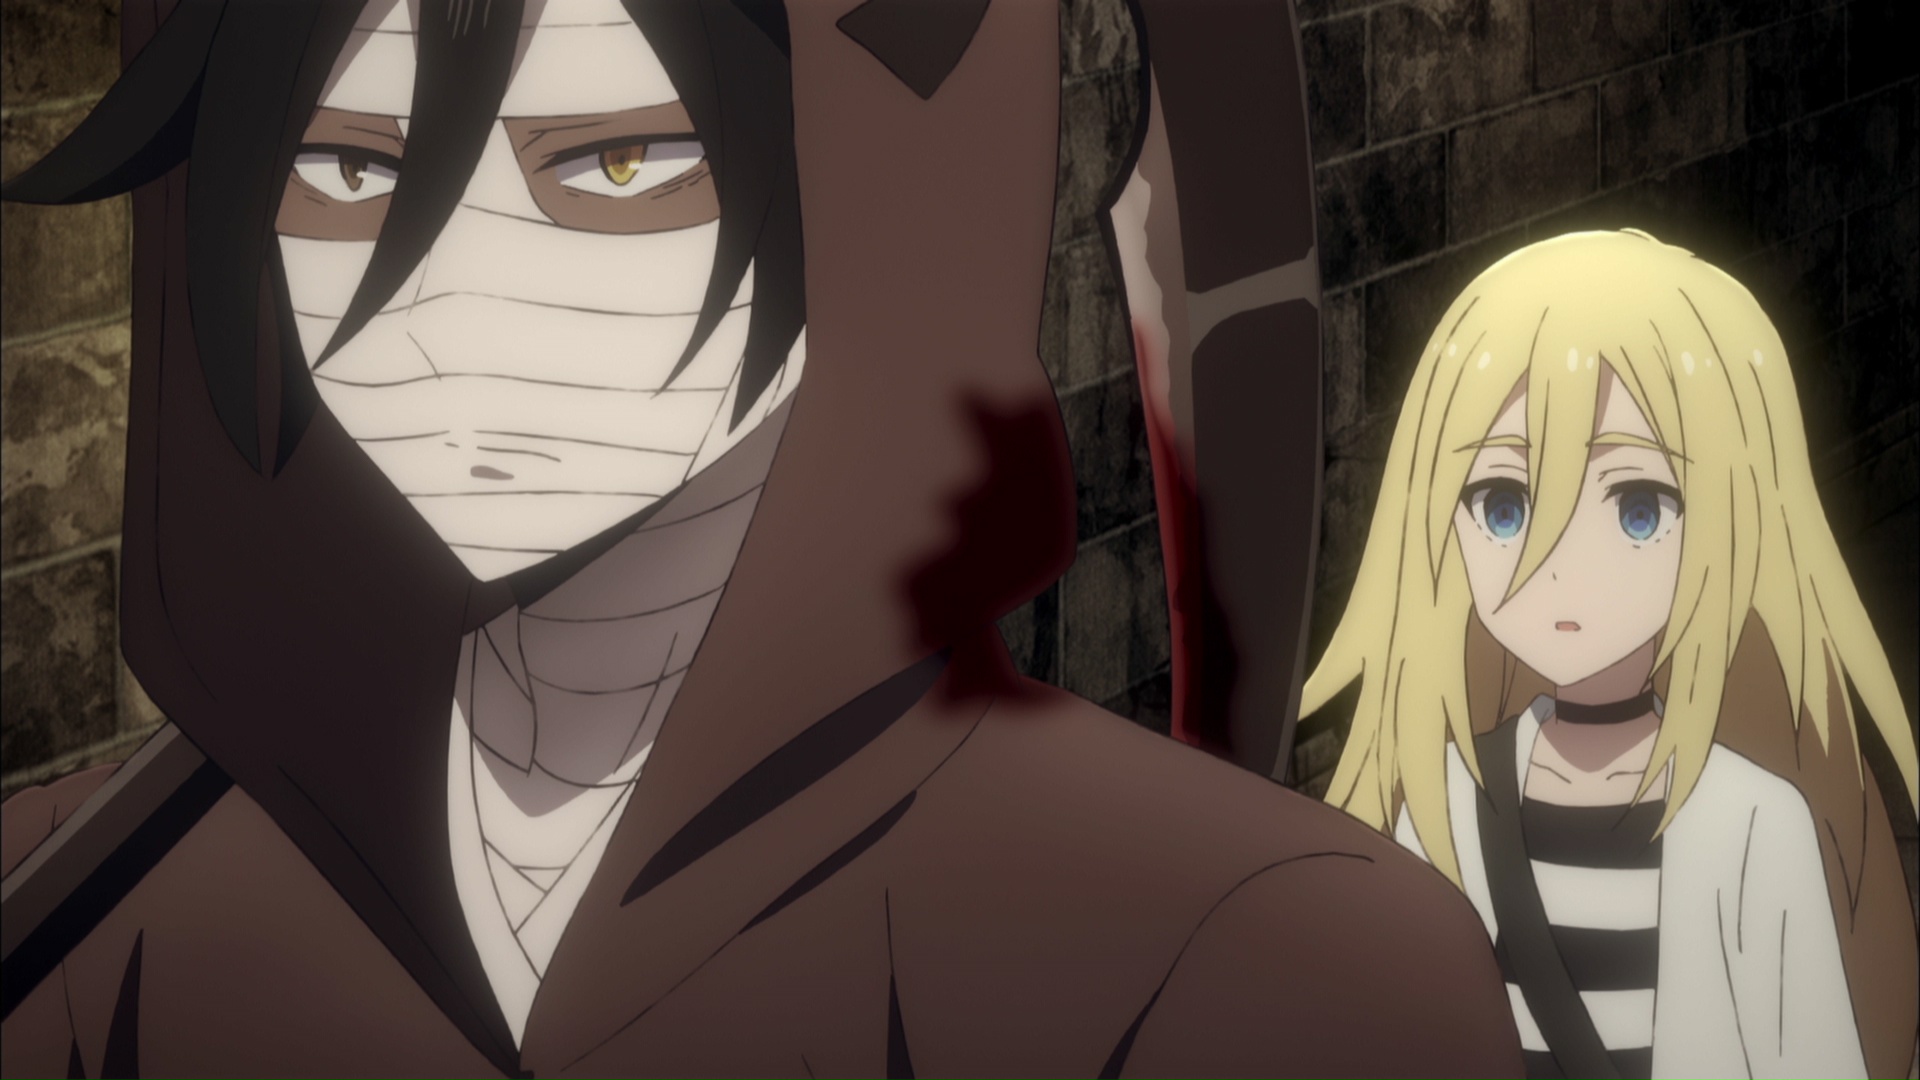 Watch Angels of Death Episode 9 Online - There is no God in this world.